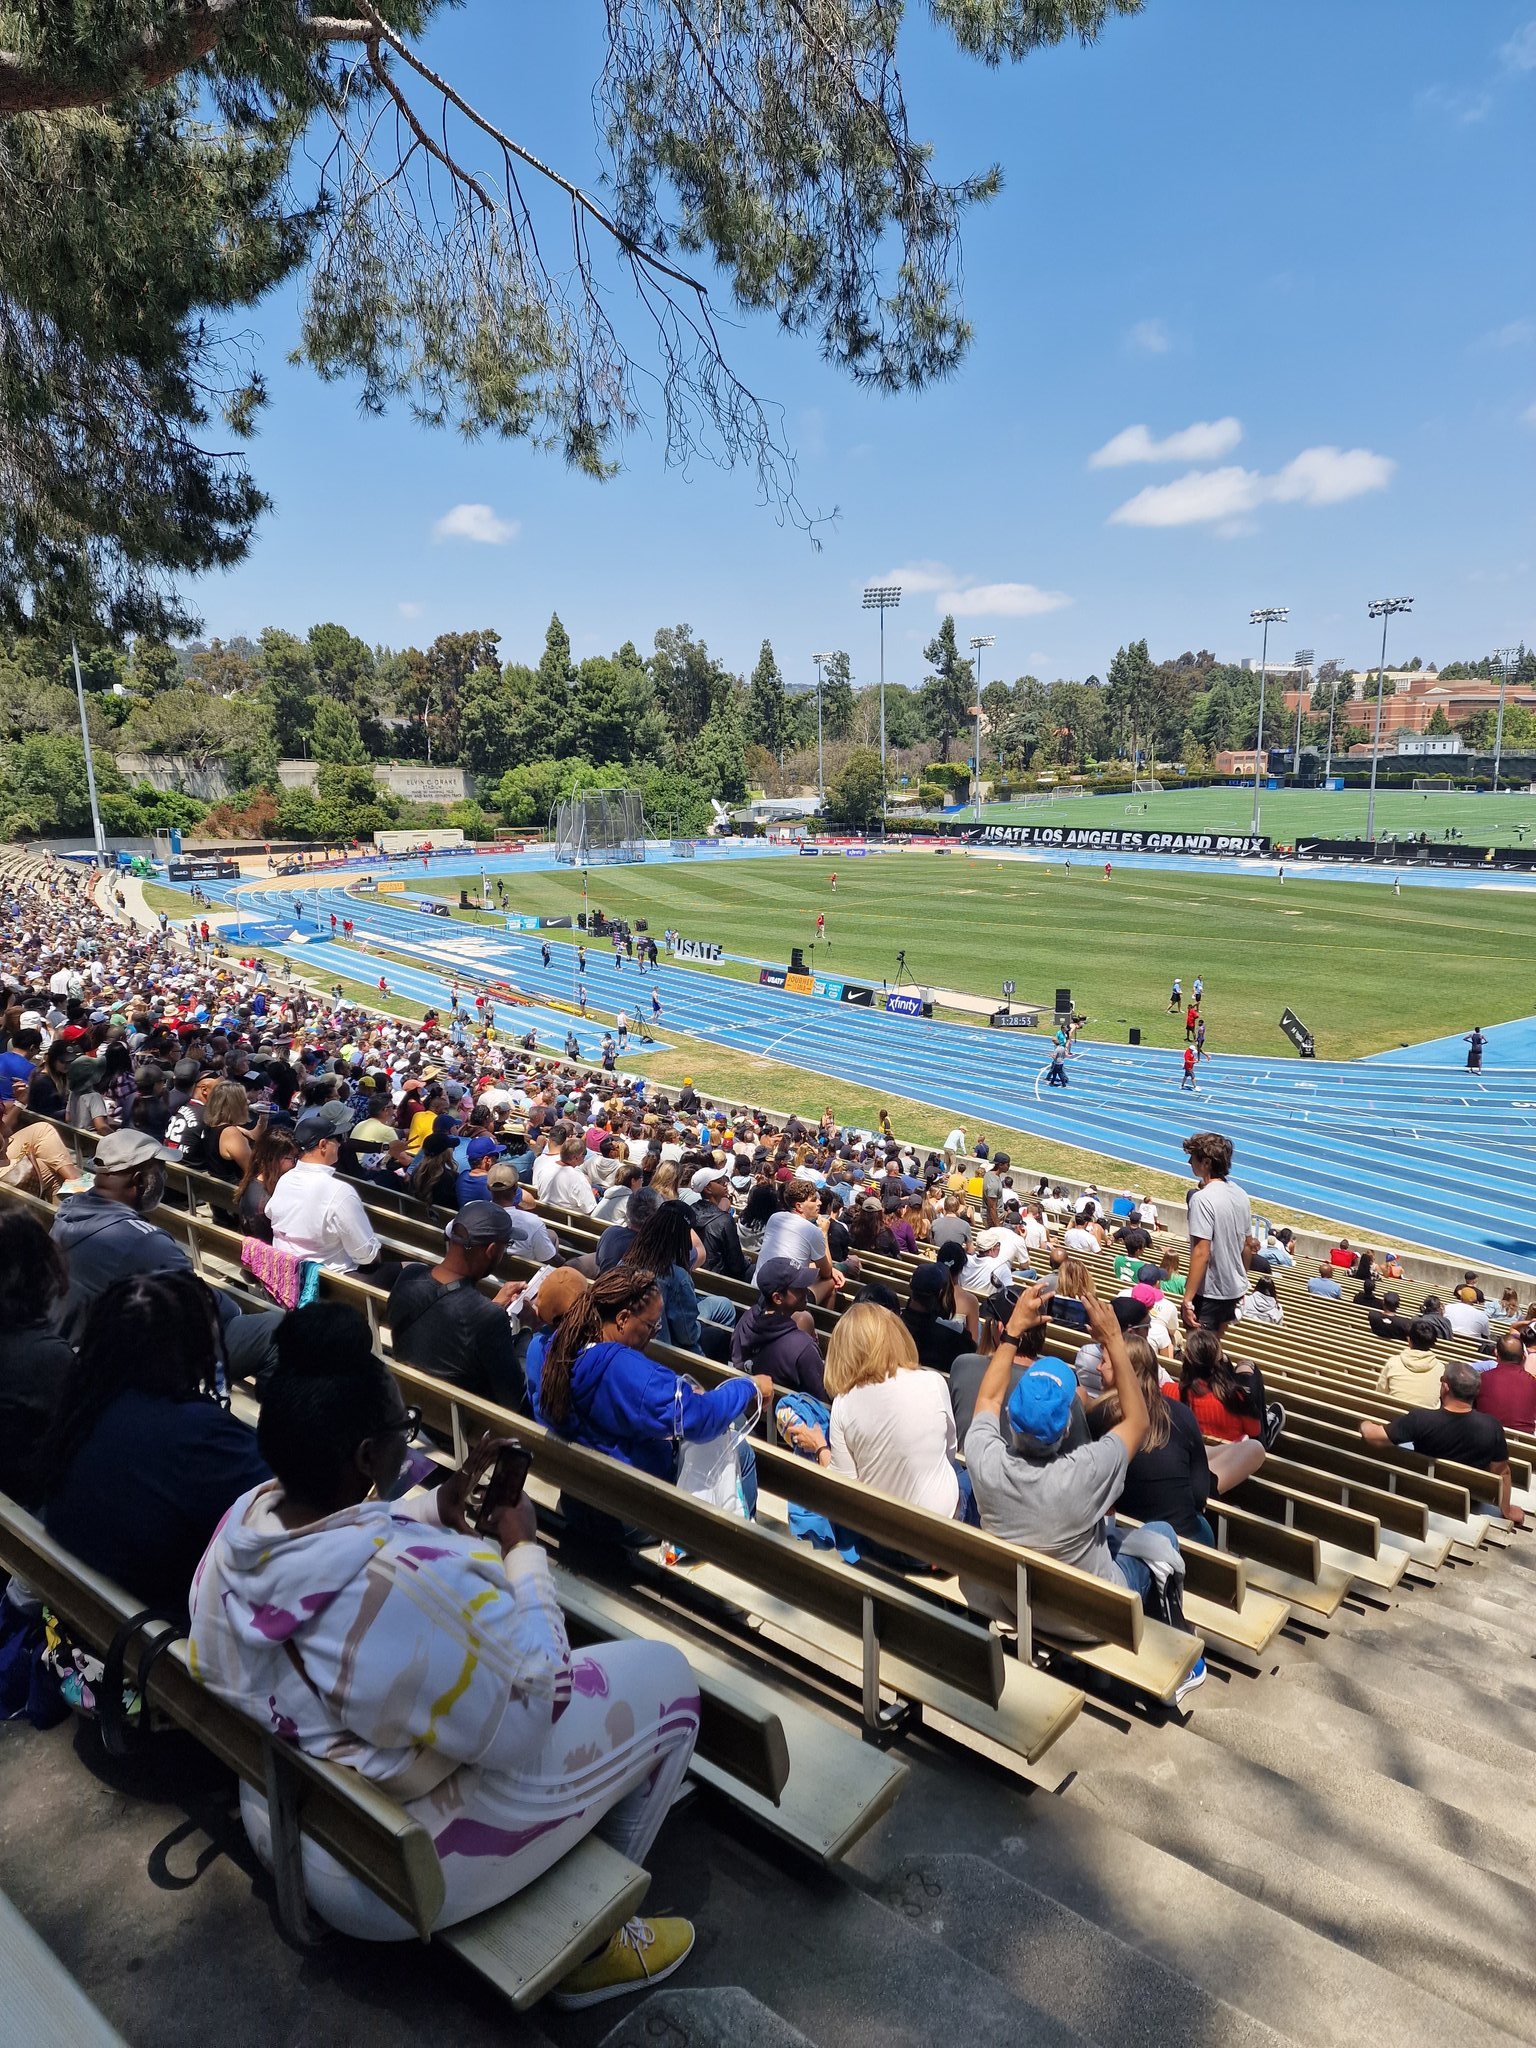 A crowd of just 7,000 turned up to watch the Los Angeles Grand Prix, which USATF have pledged to continue supporting to help raise the profile of the sport before the 2028 Olympics ©Twitter